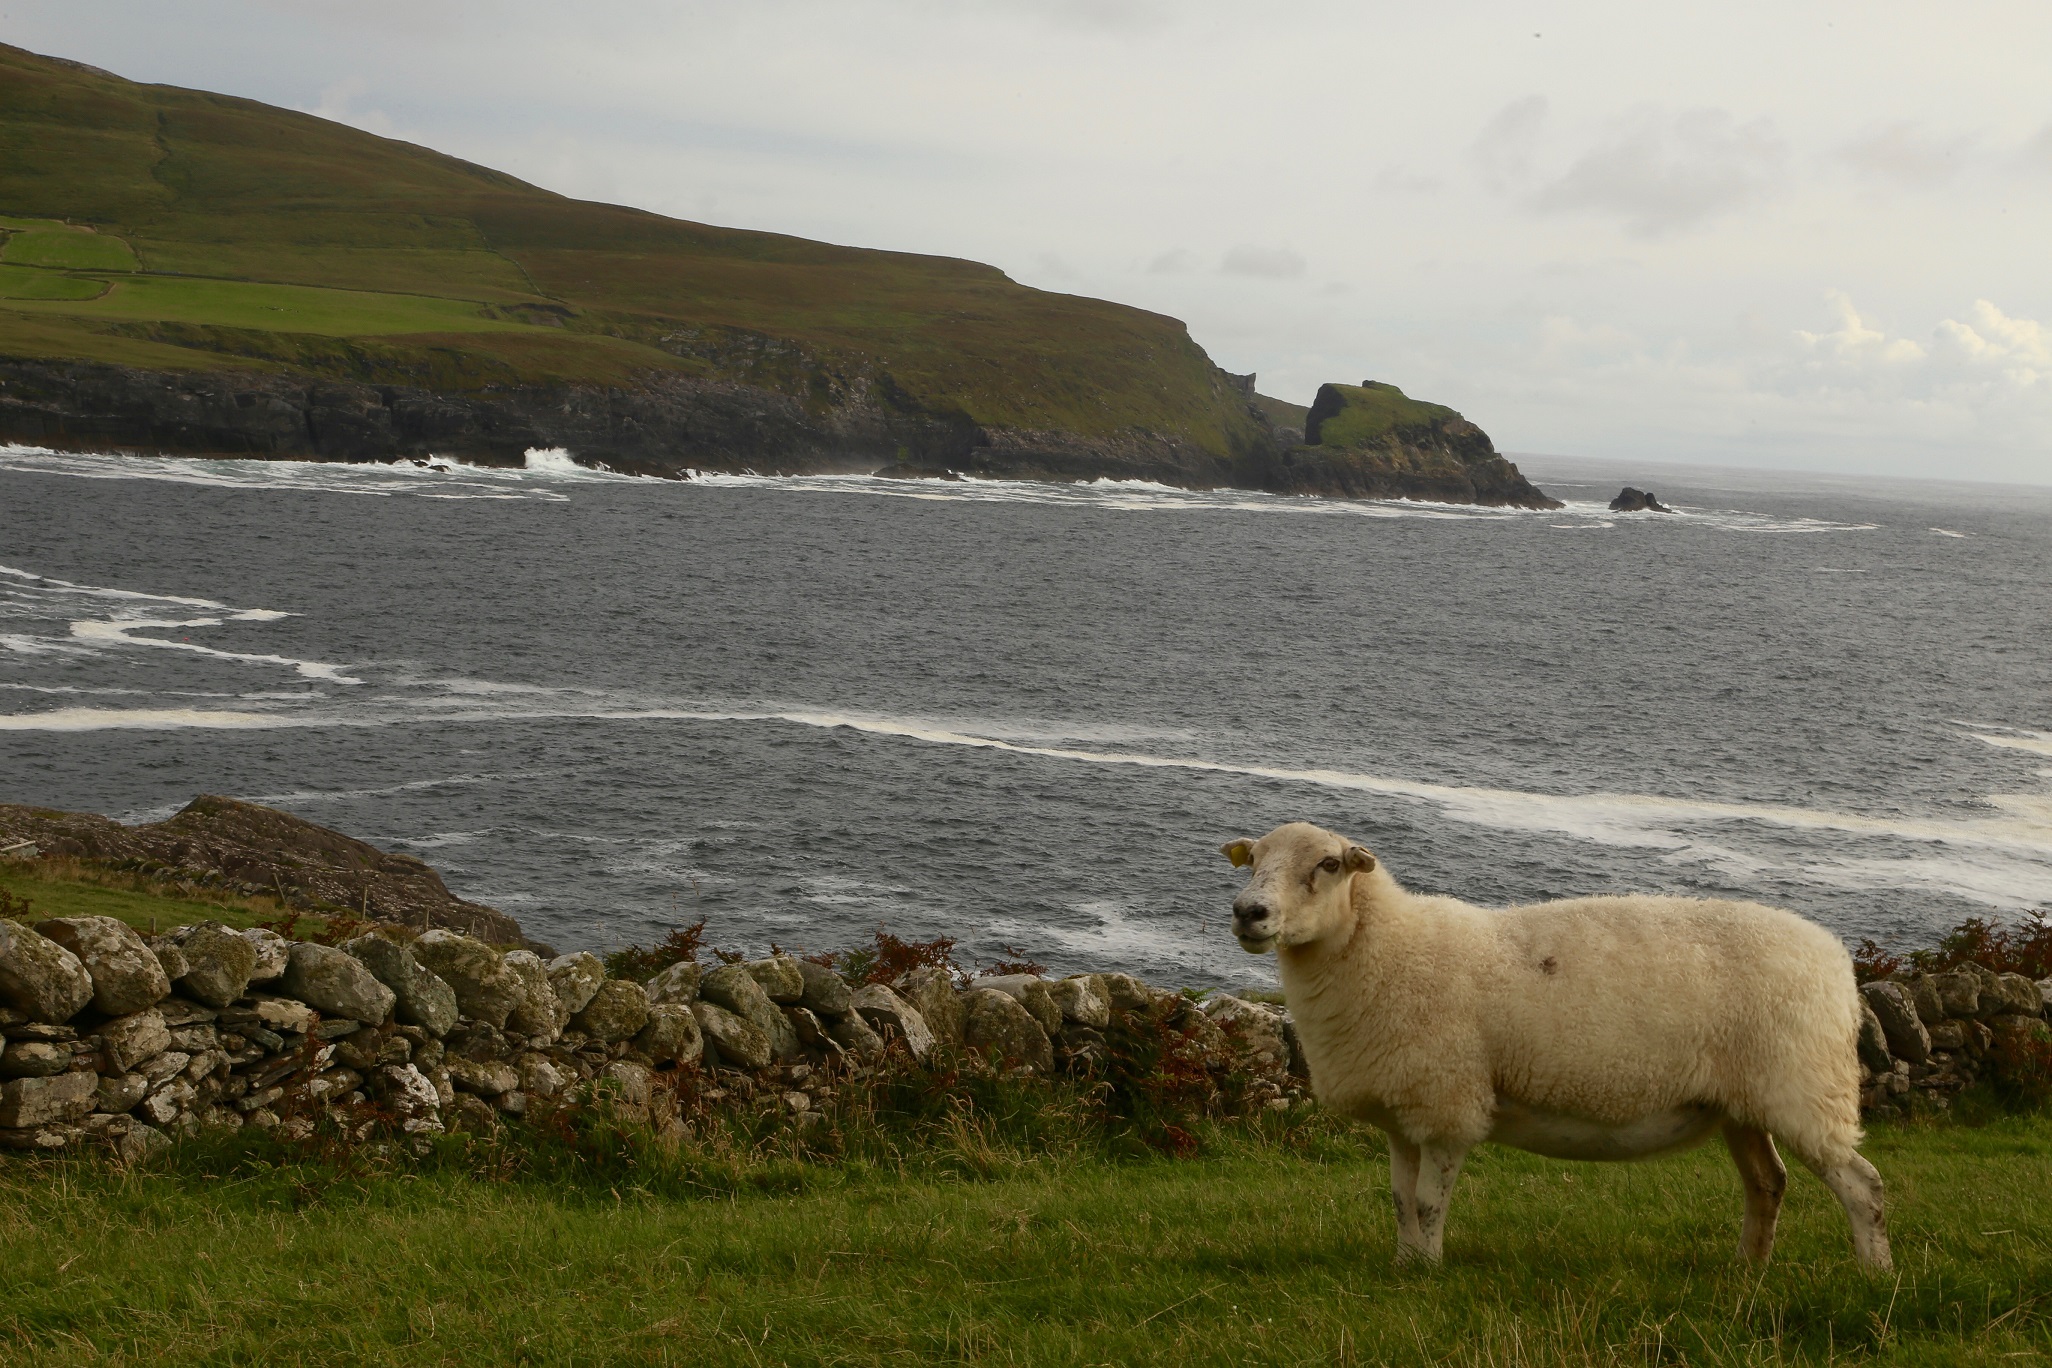 Often hearing about a place called "Three Castle Head",  one day, while taking some postcard-style photos of sheep, a man decided he had to find out if it was true.